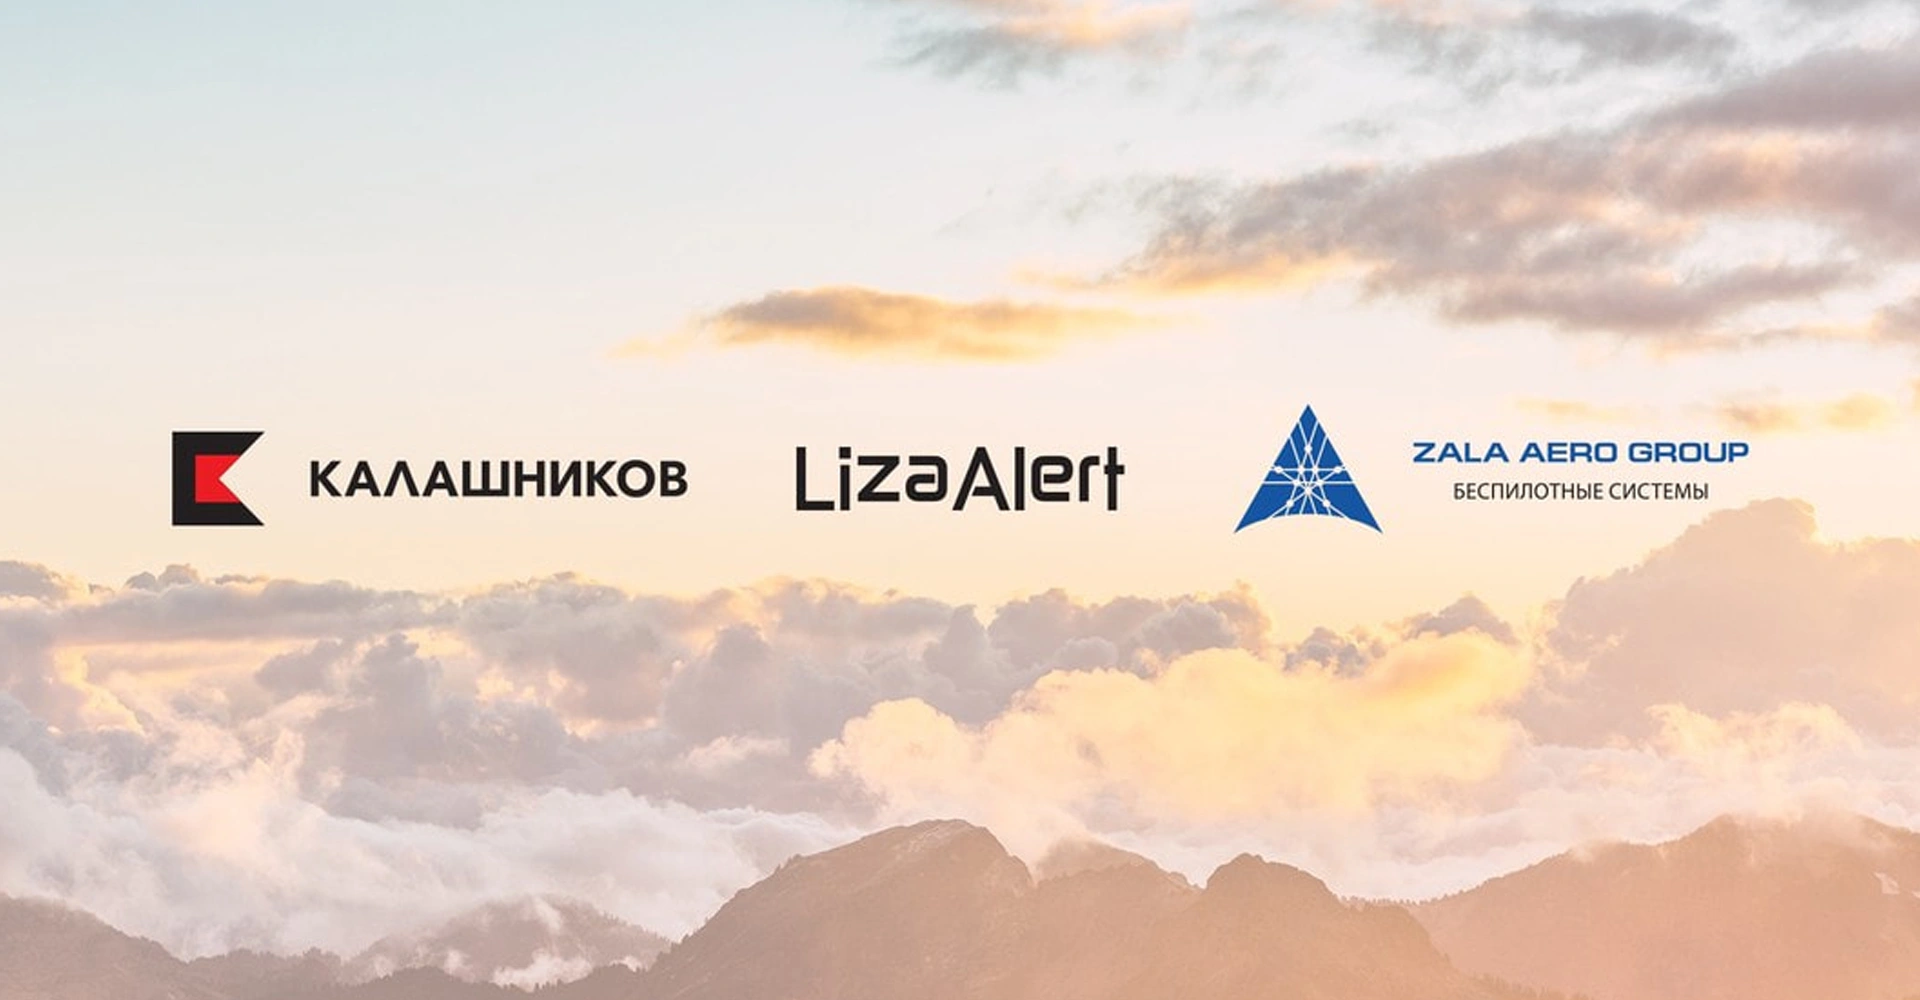 ZALA AERO drones will help Liza Alert to rescue people in 60 regions of the country